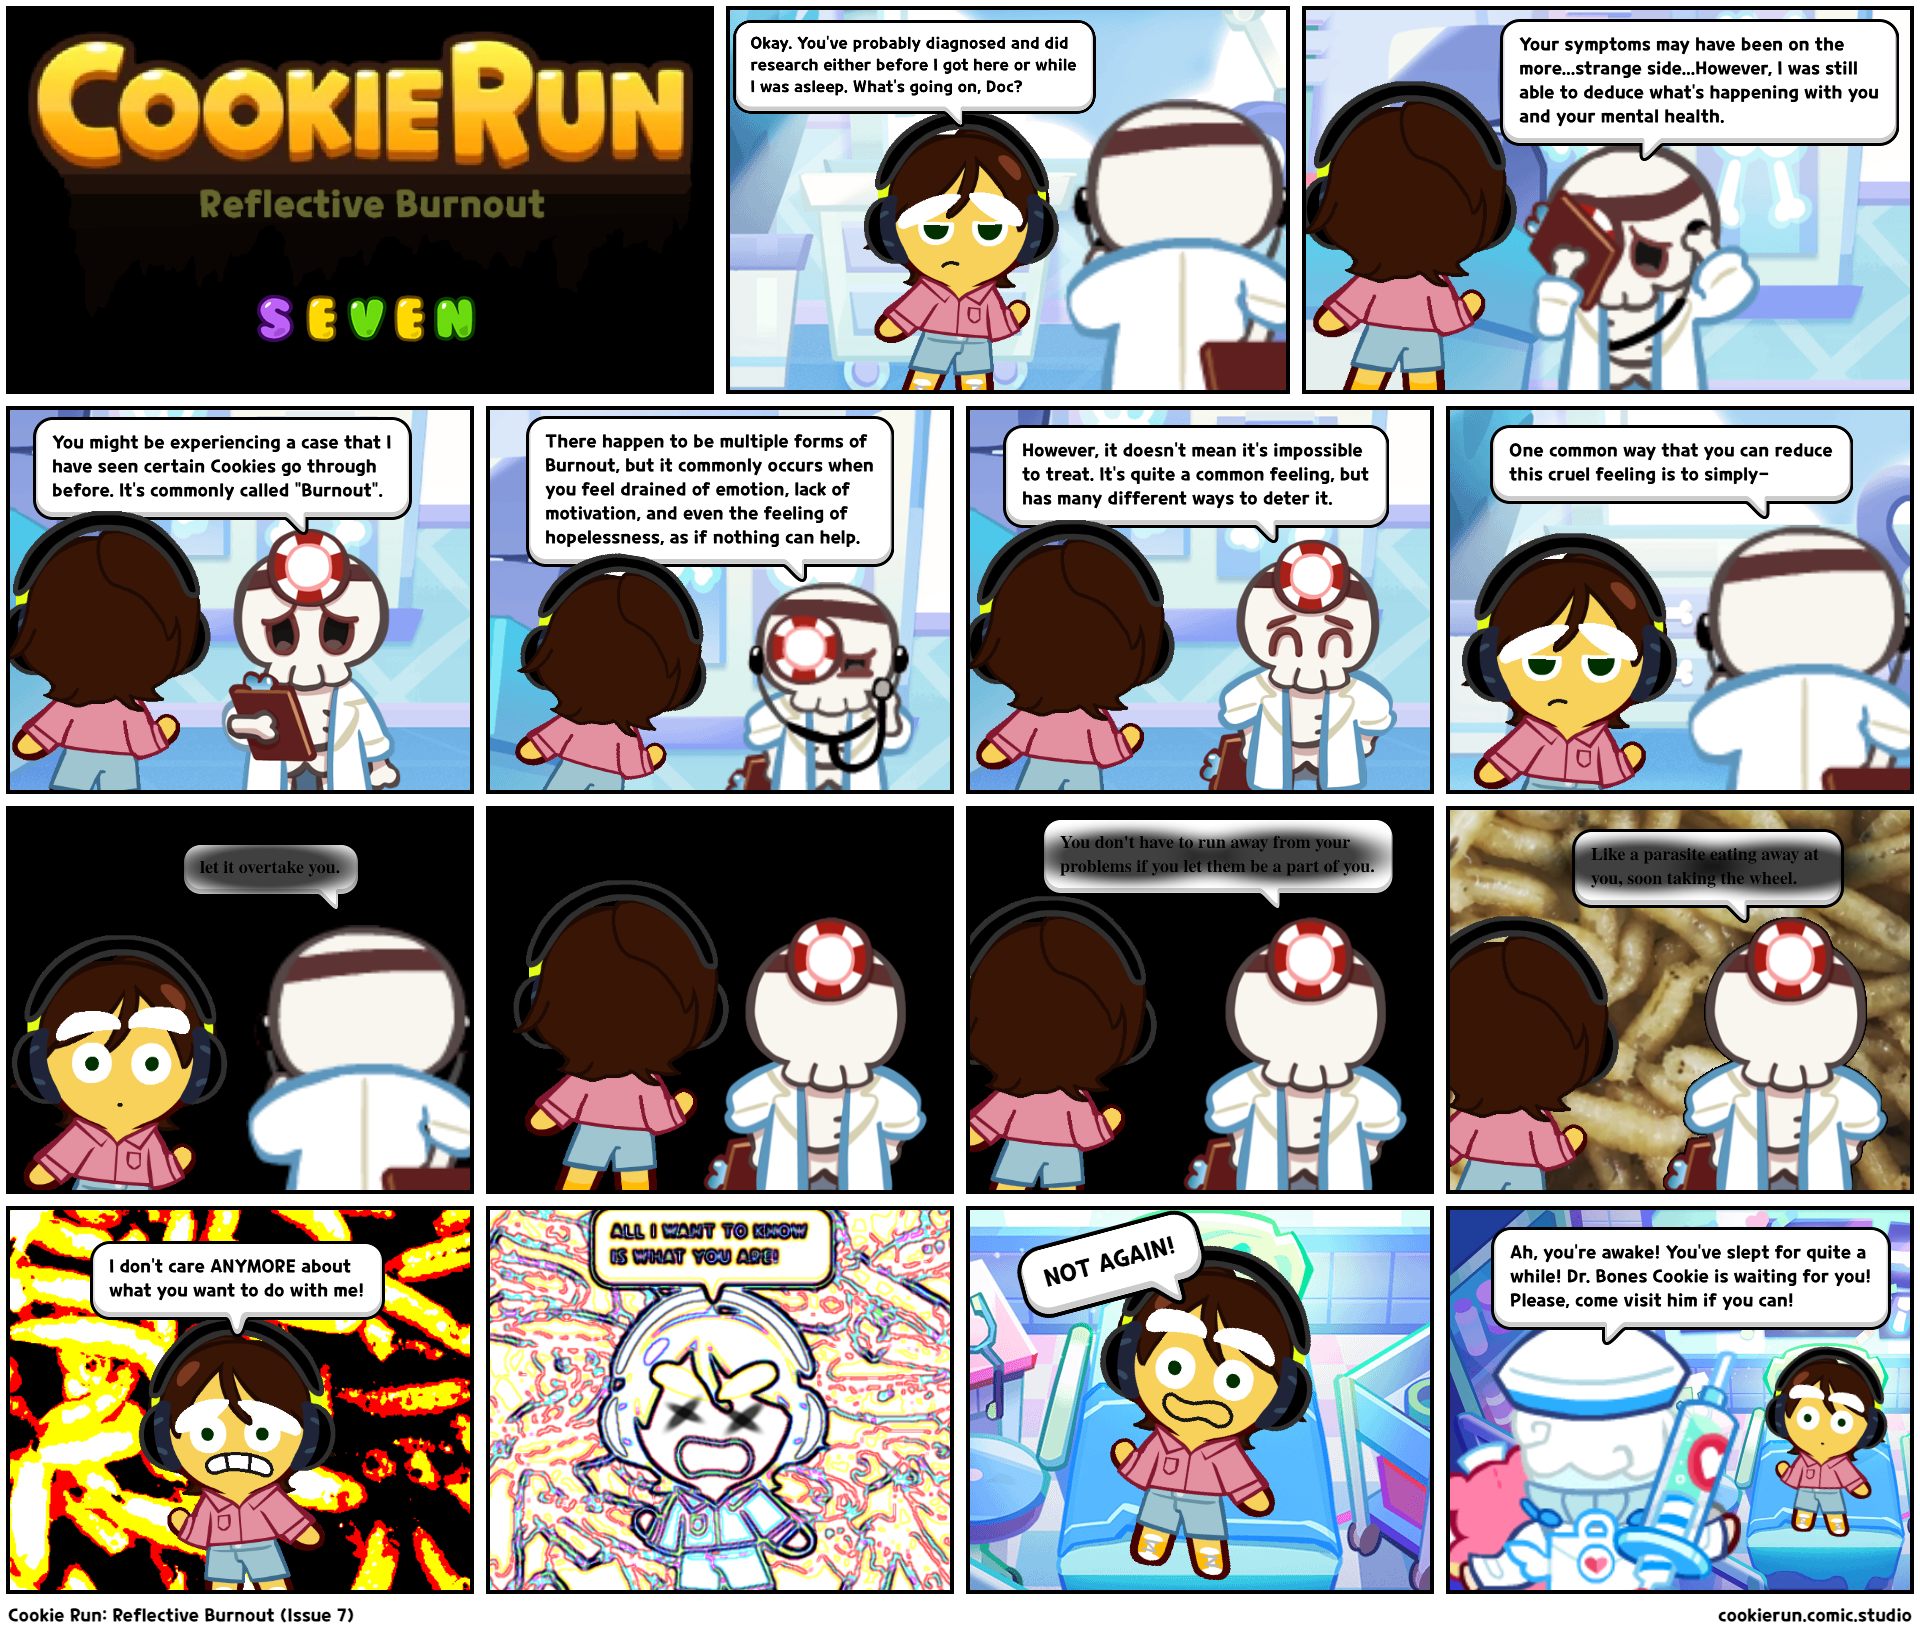 Cookie Run: Reflective Burnout (Issue 7)